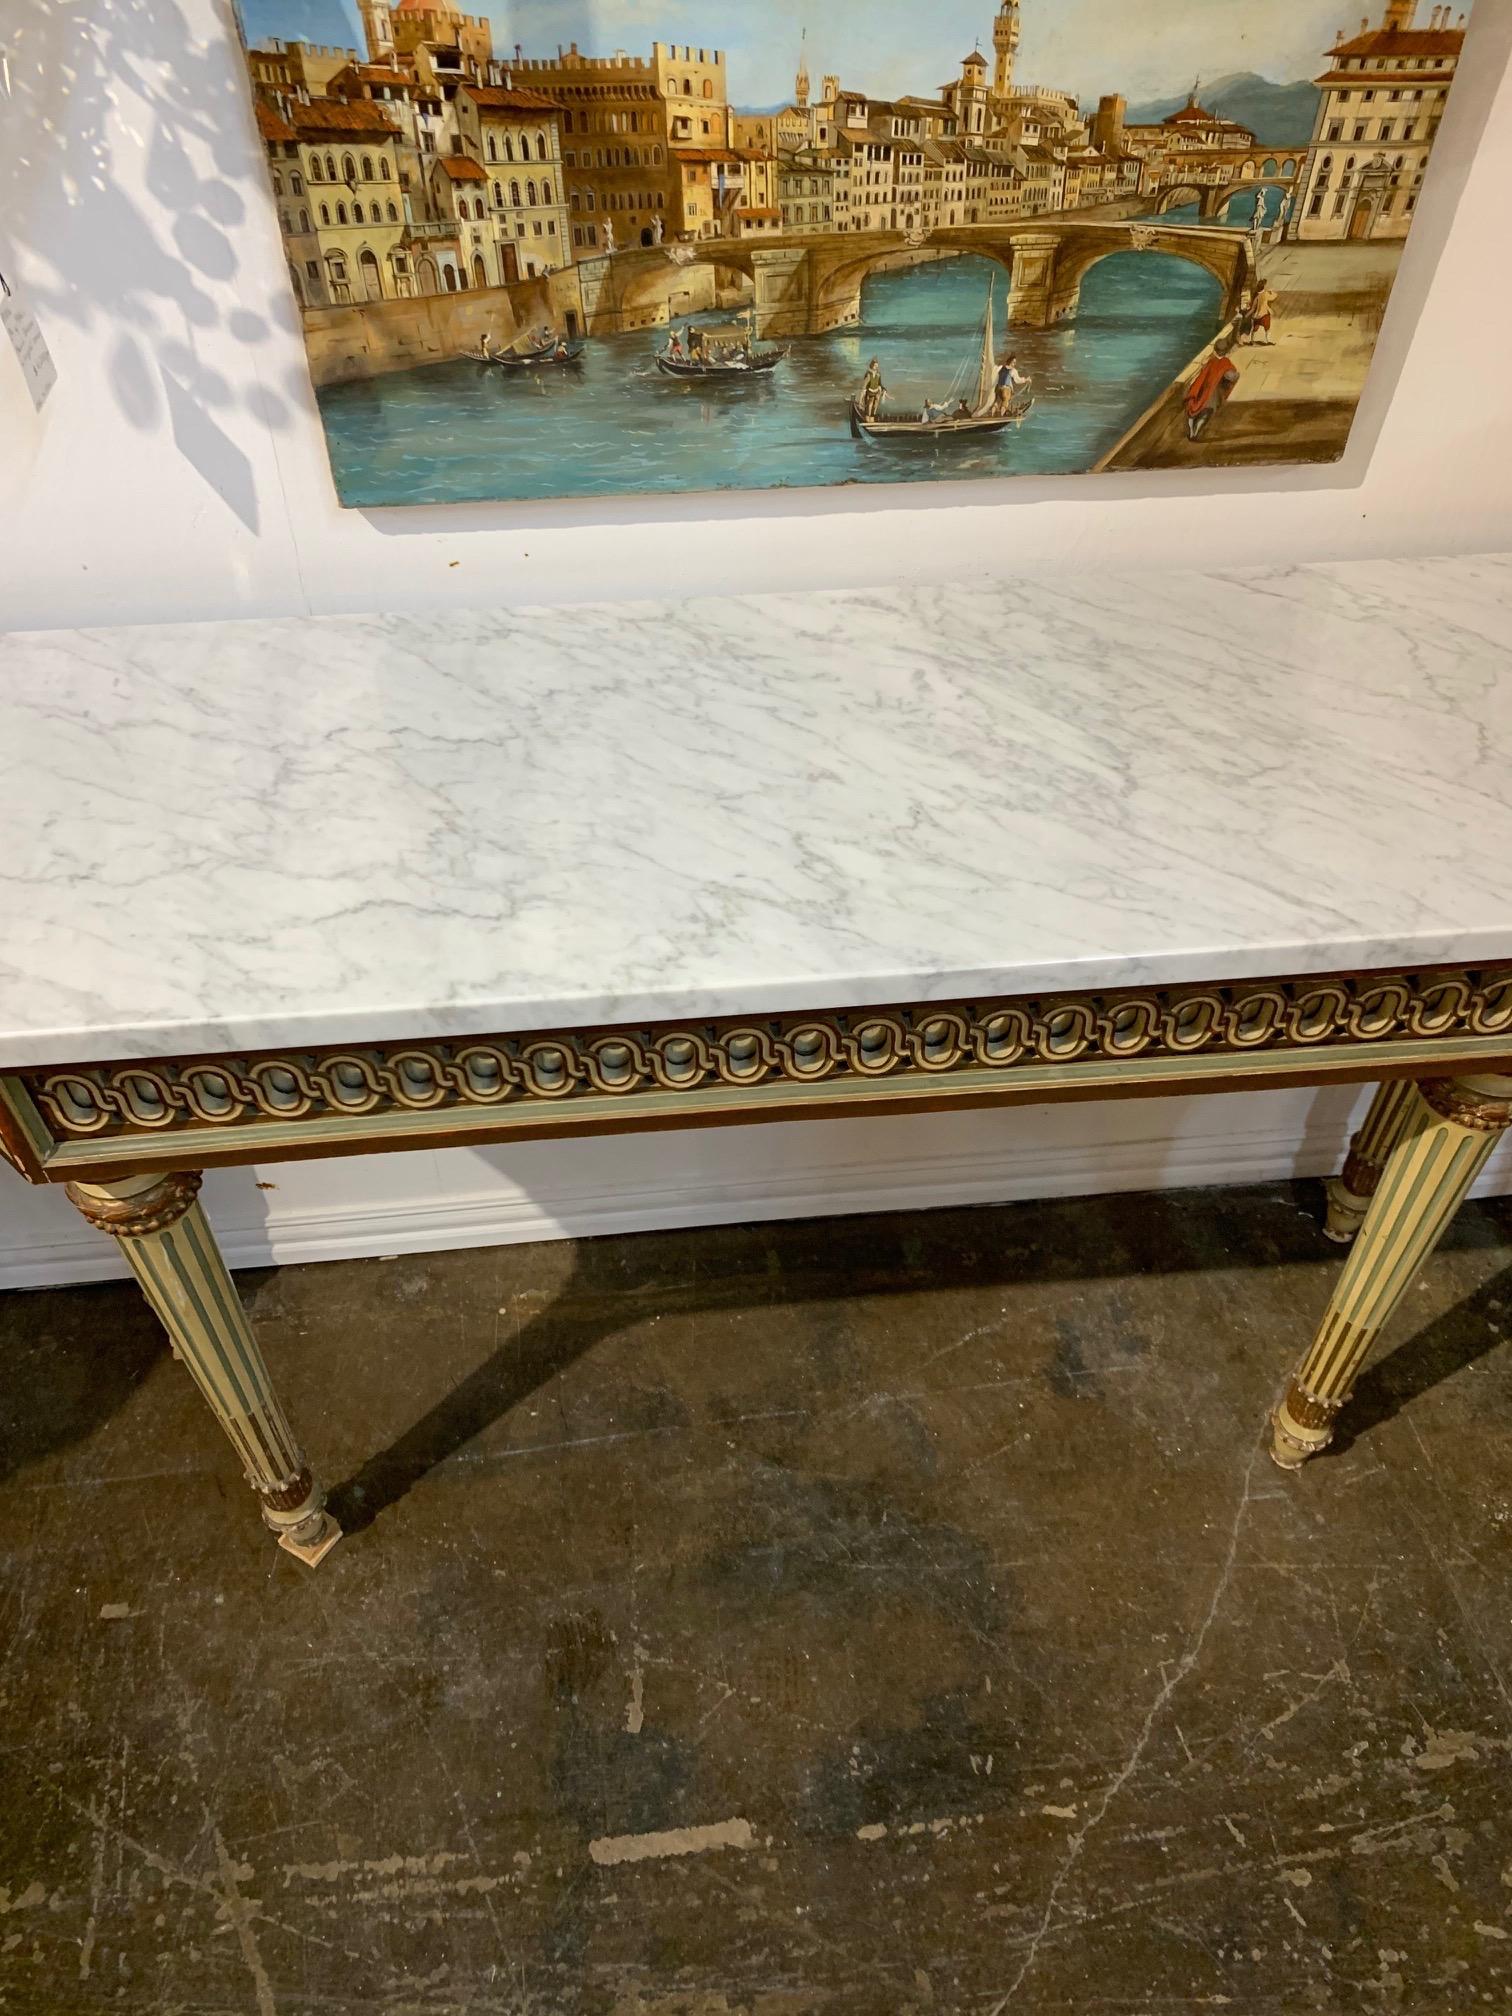 Beautiful antique Italian carved and painted console with marble top. Fabulous intricate carvings on the base and the marble is exquisite. Makes an impressive statement!